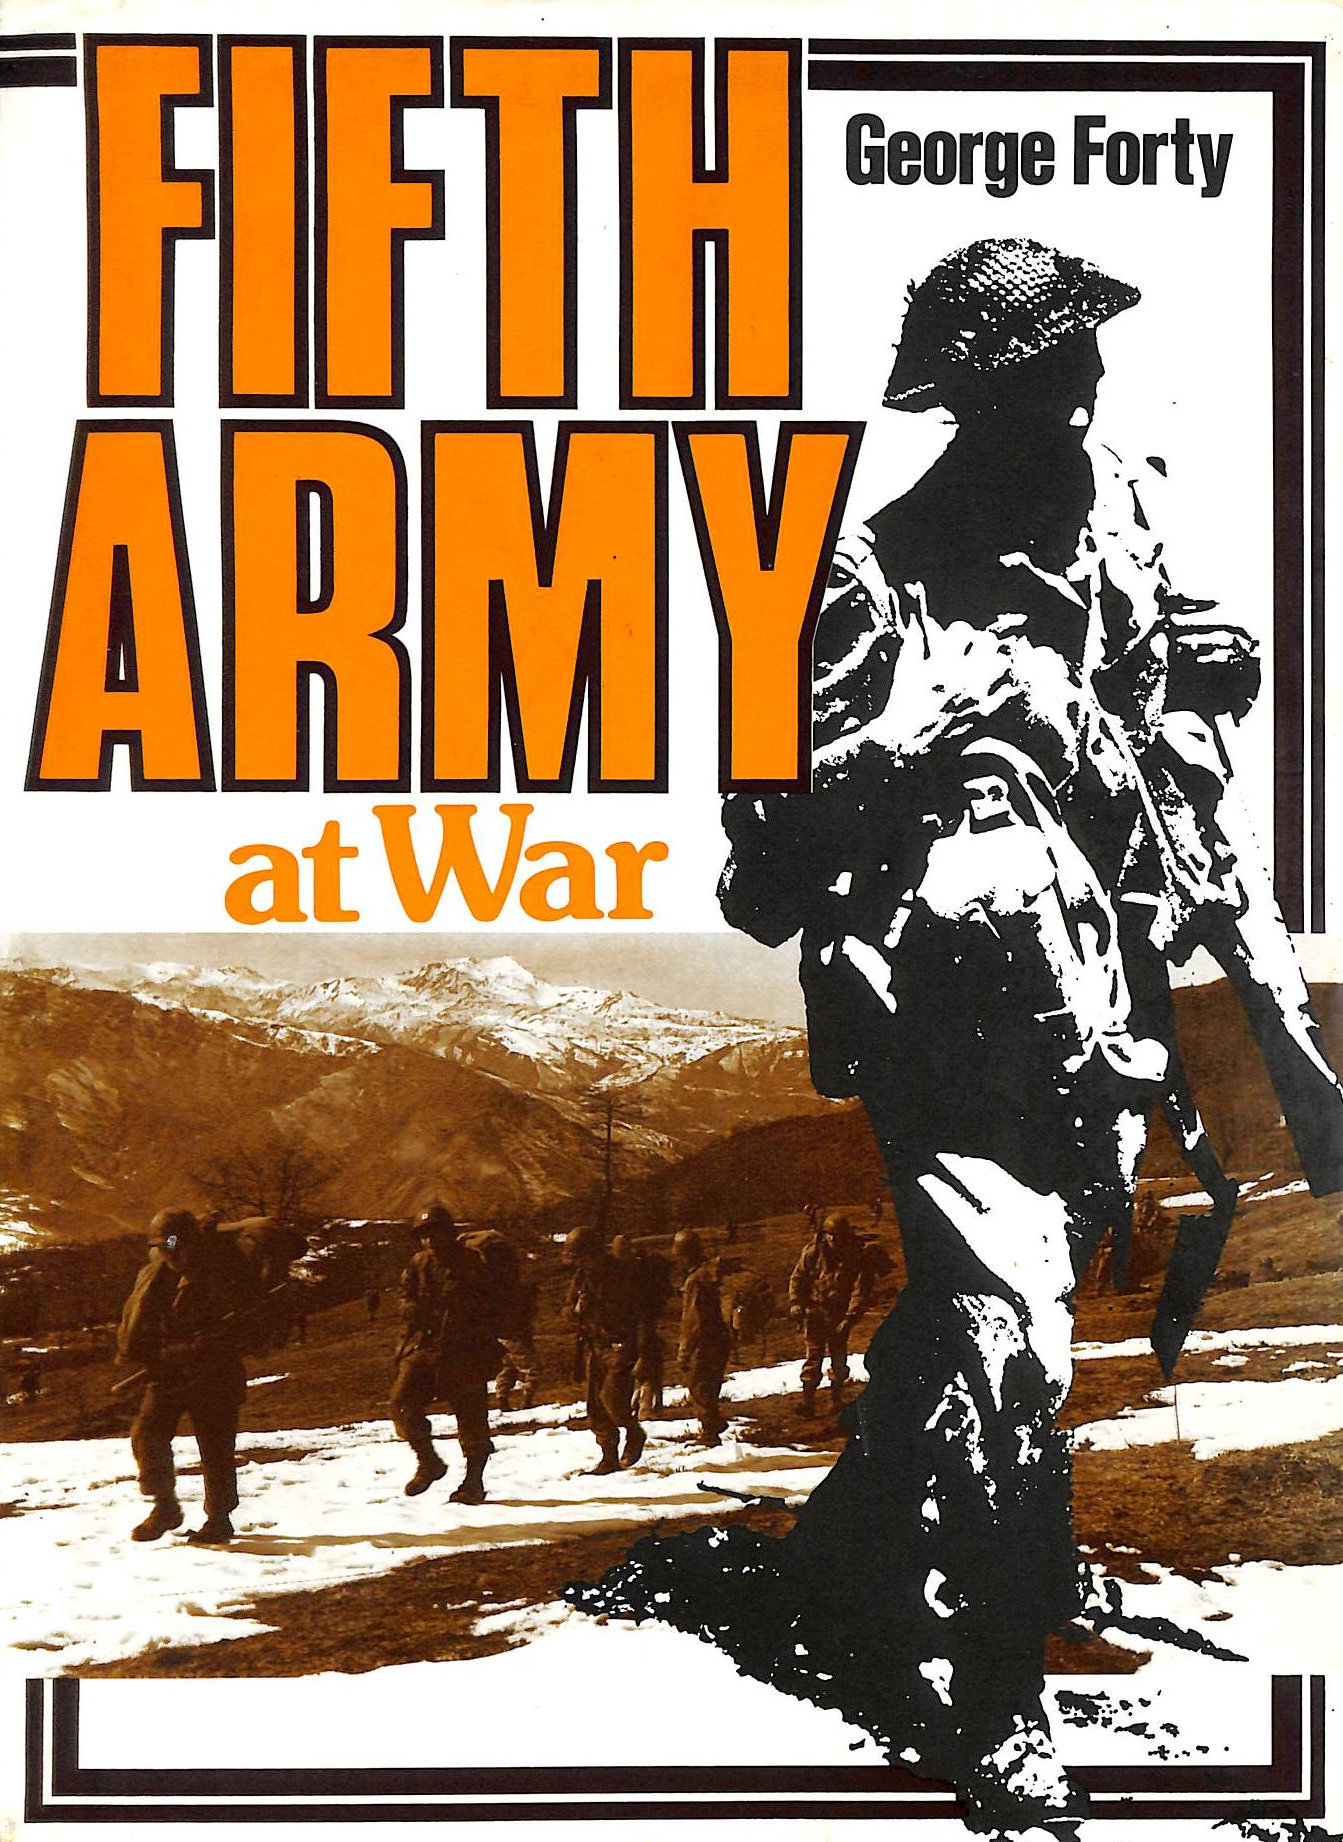 FORTY, GEORGE - Fifth Army at war